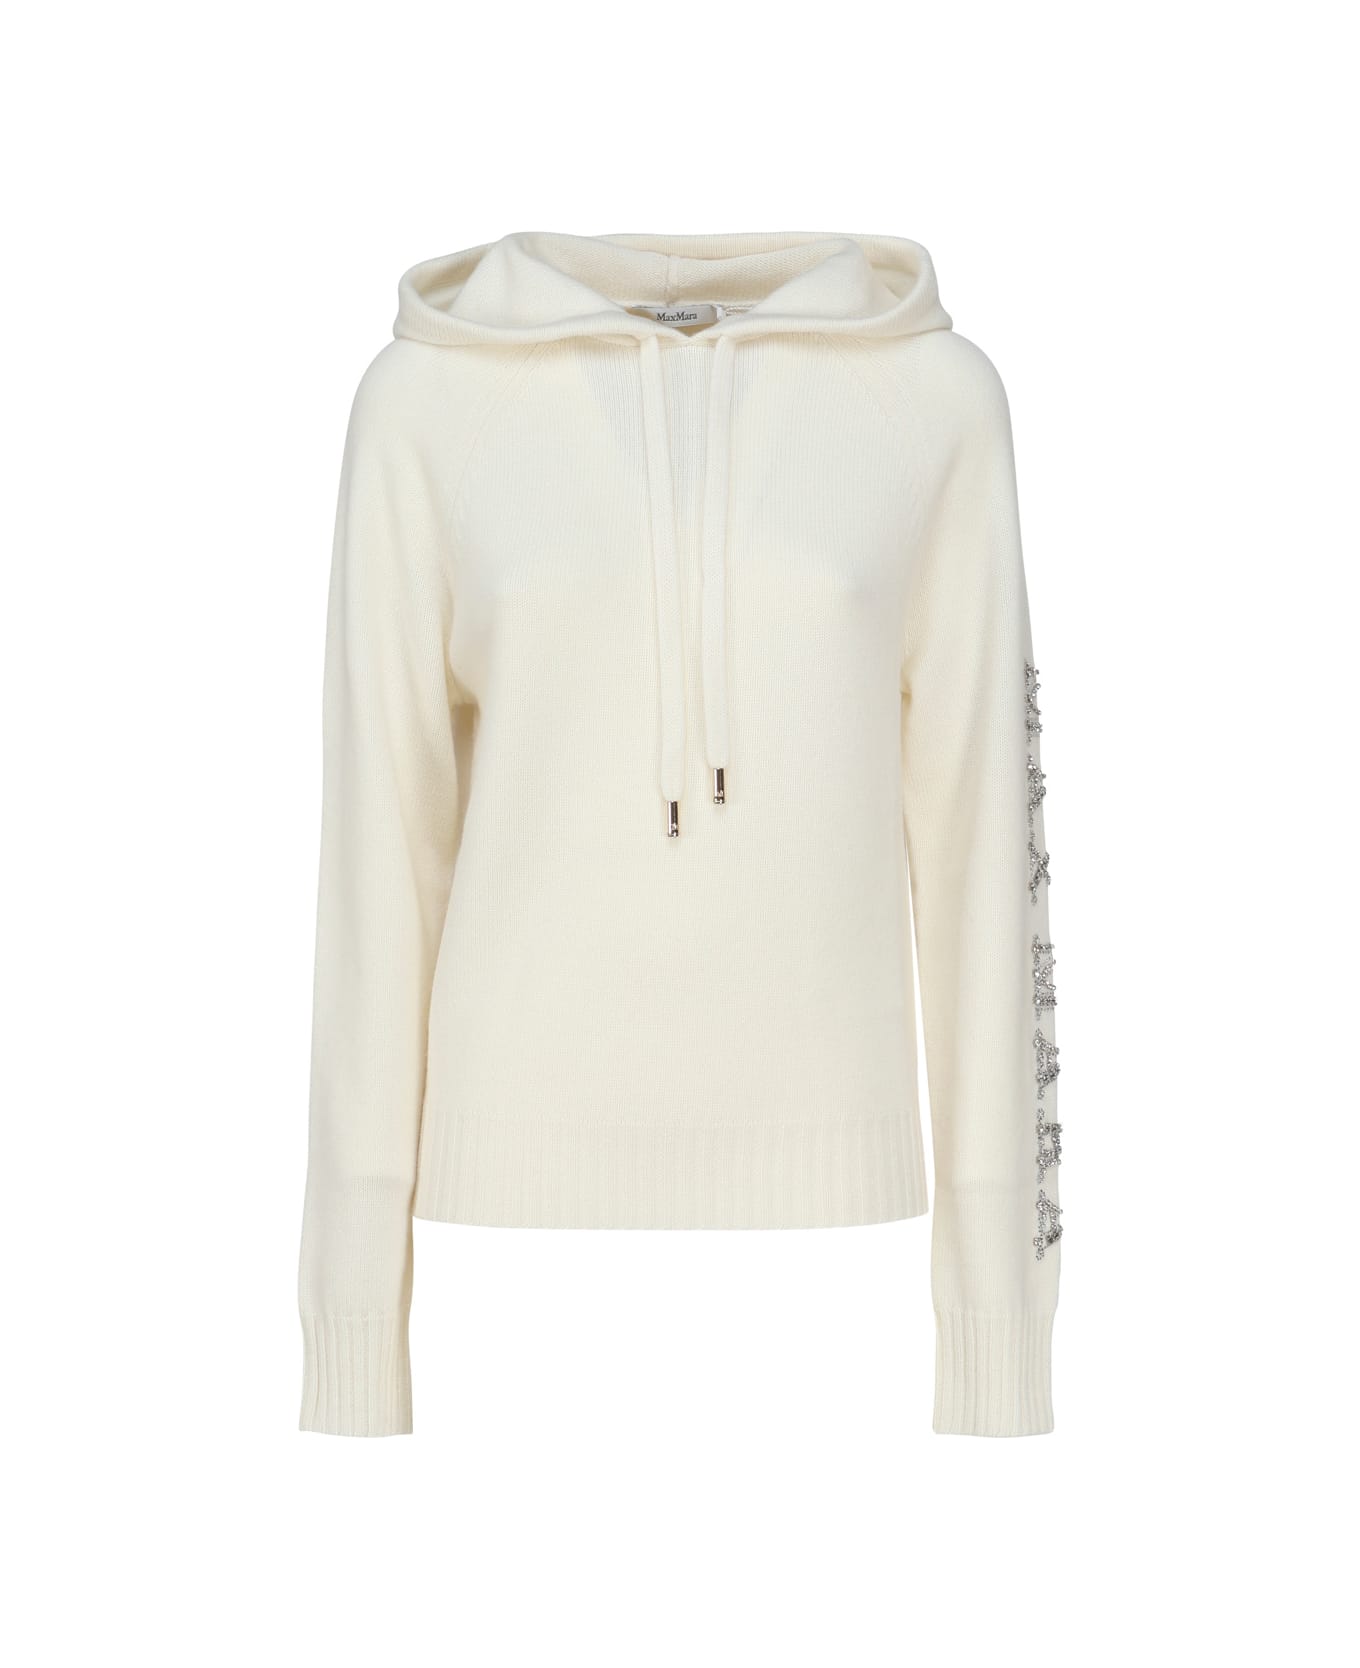 Max Mara Pineapple Sweater In Wool And Cashmere - White